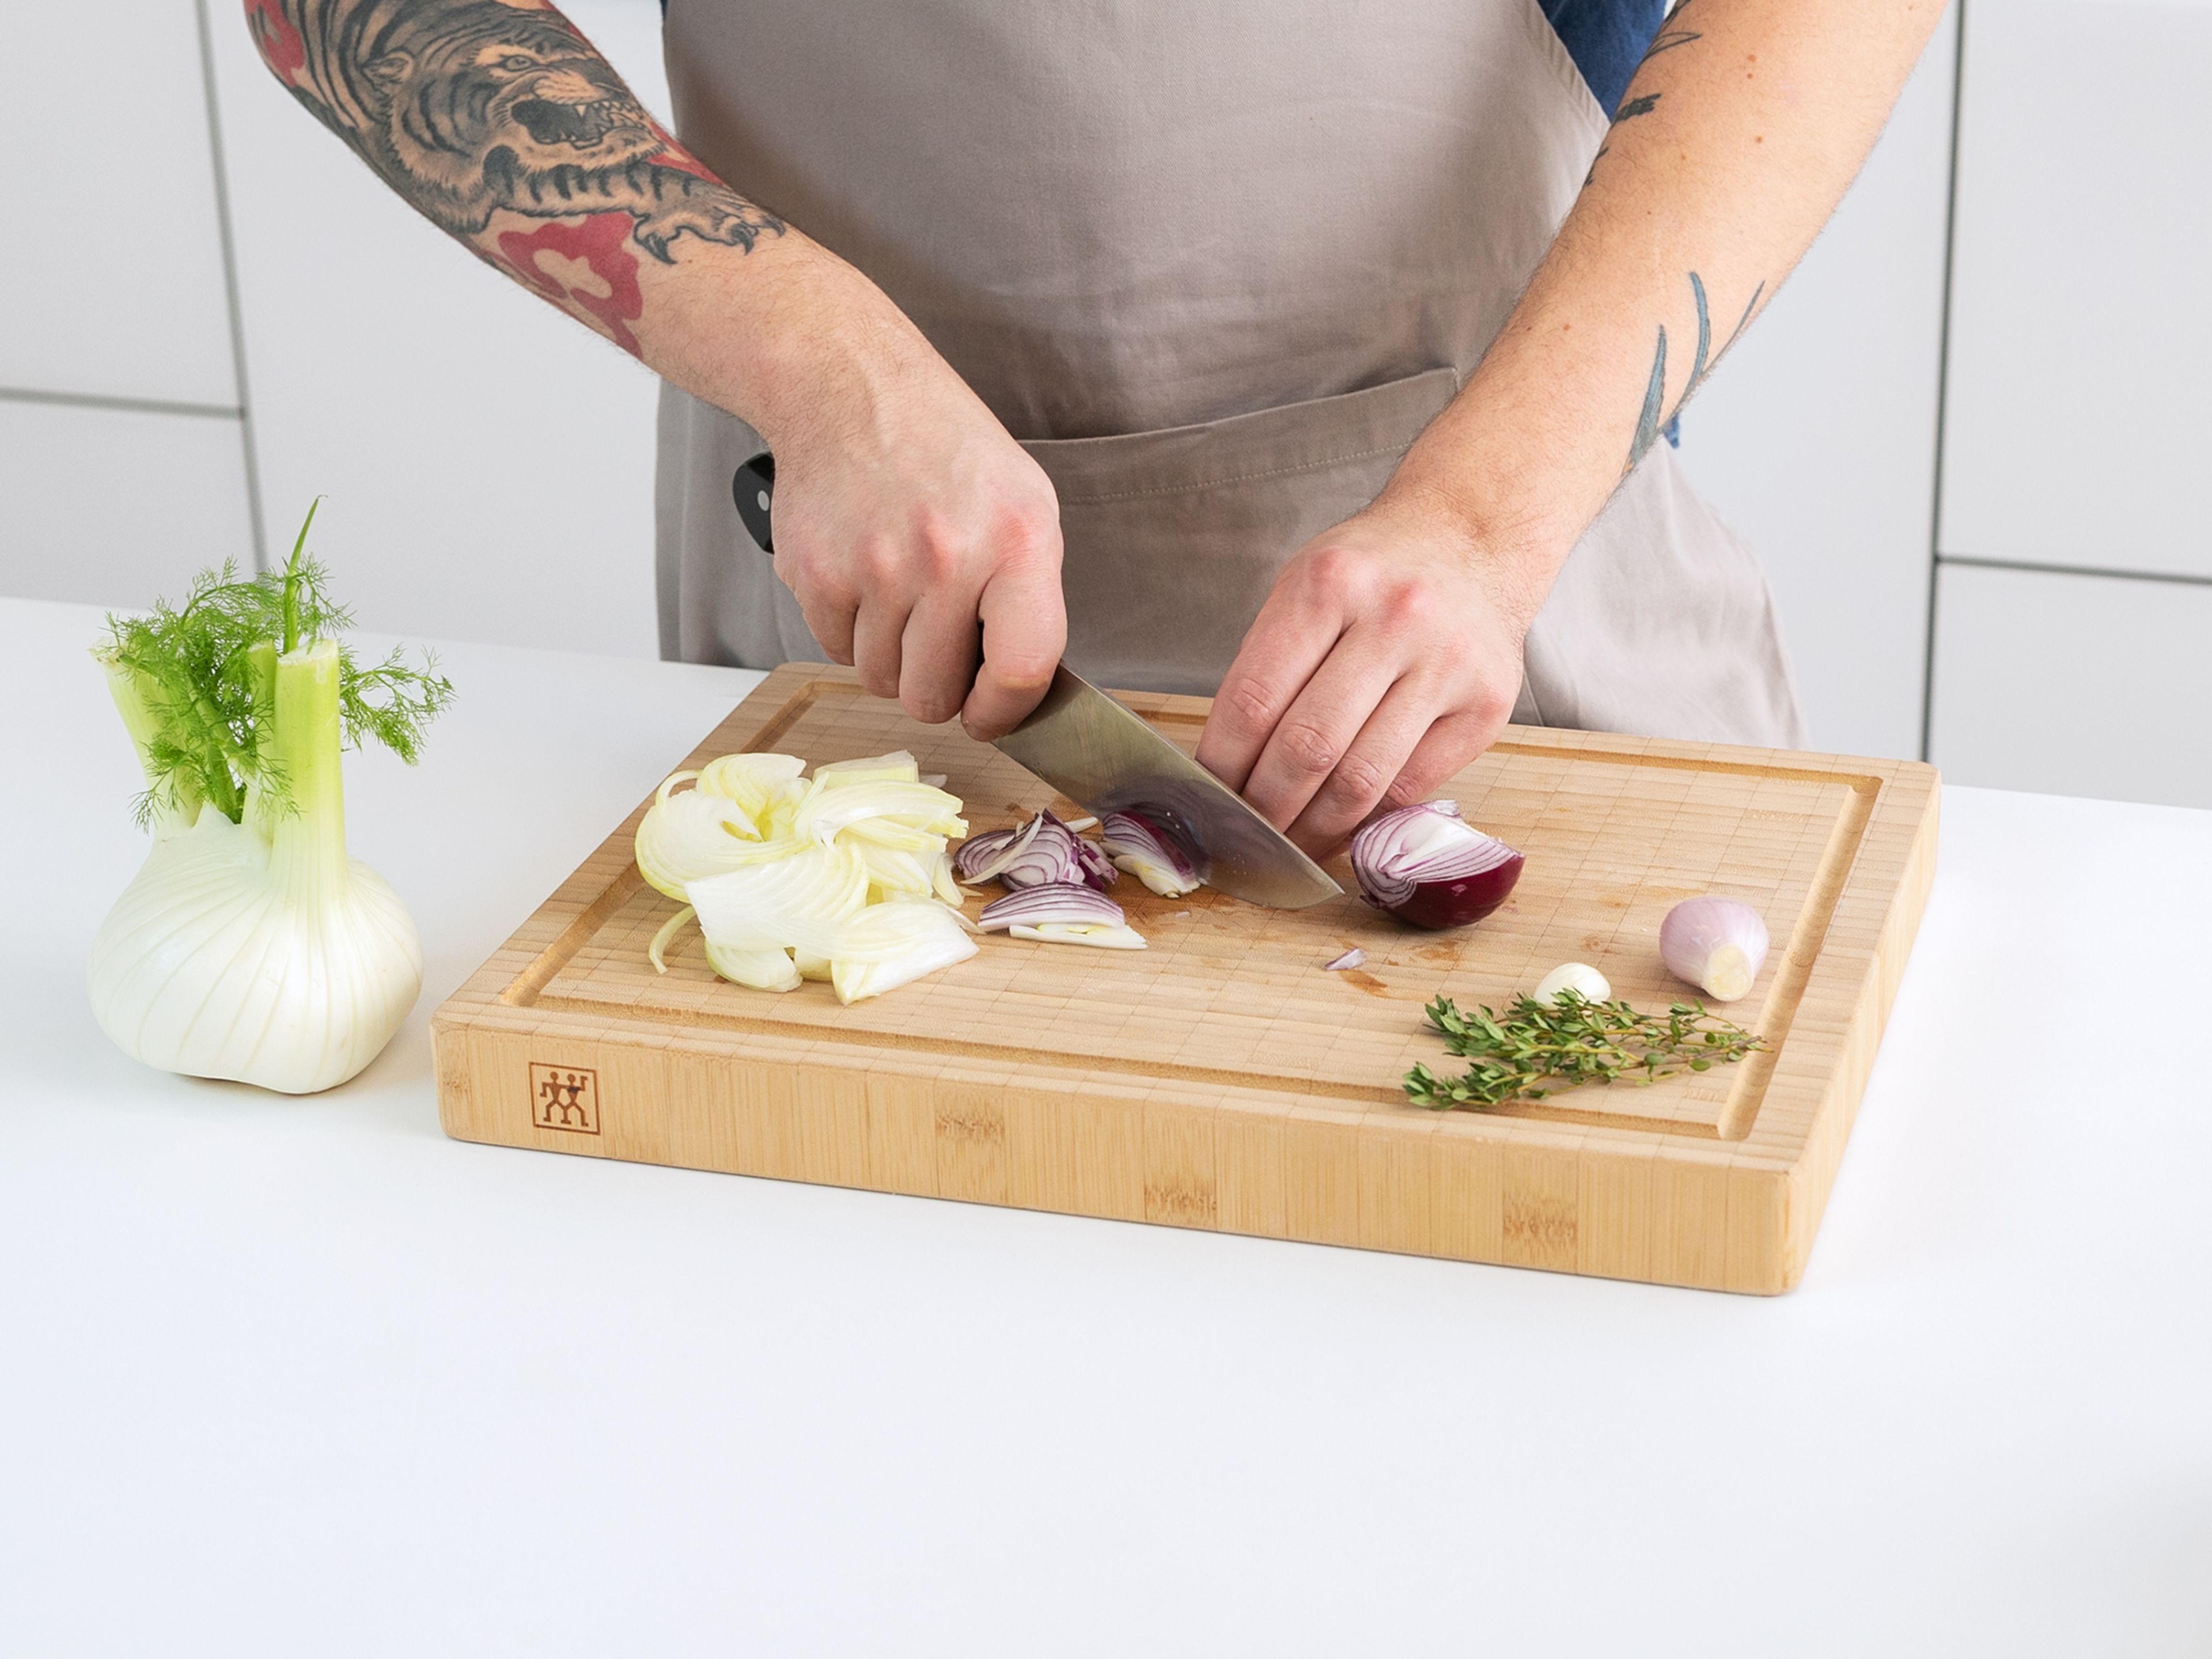 In the meantime, use a mandoline to thinly slice fennel, reserving any fronds for garnish. Peel and thinly slice onion, red onion, and shallot using the mandoline. Peel and mince garlic. Remove thyme leaves from sprigs. Slice mozzarella cheese.